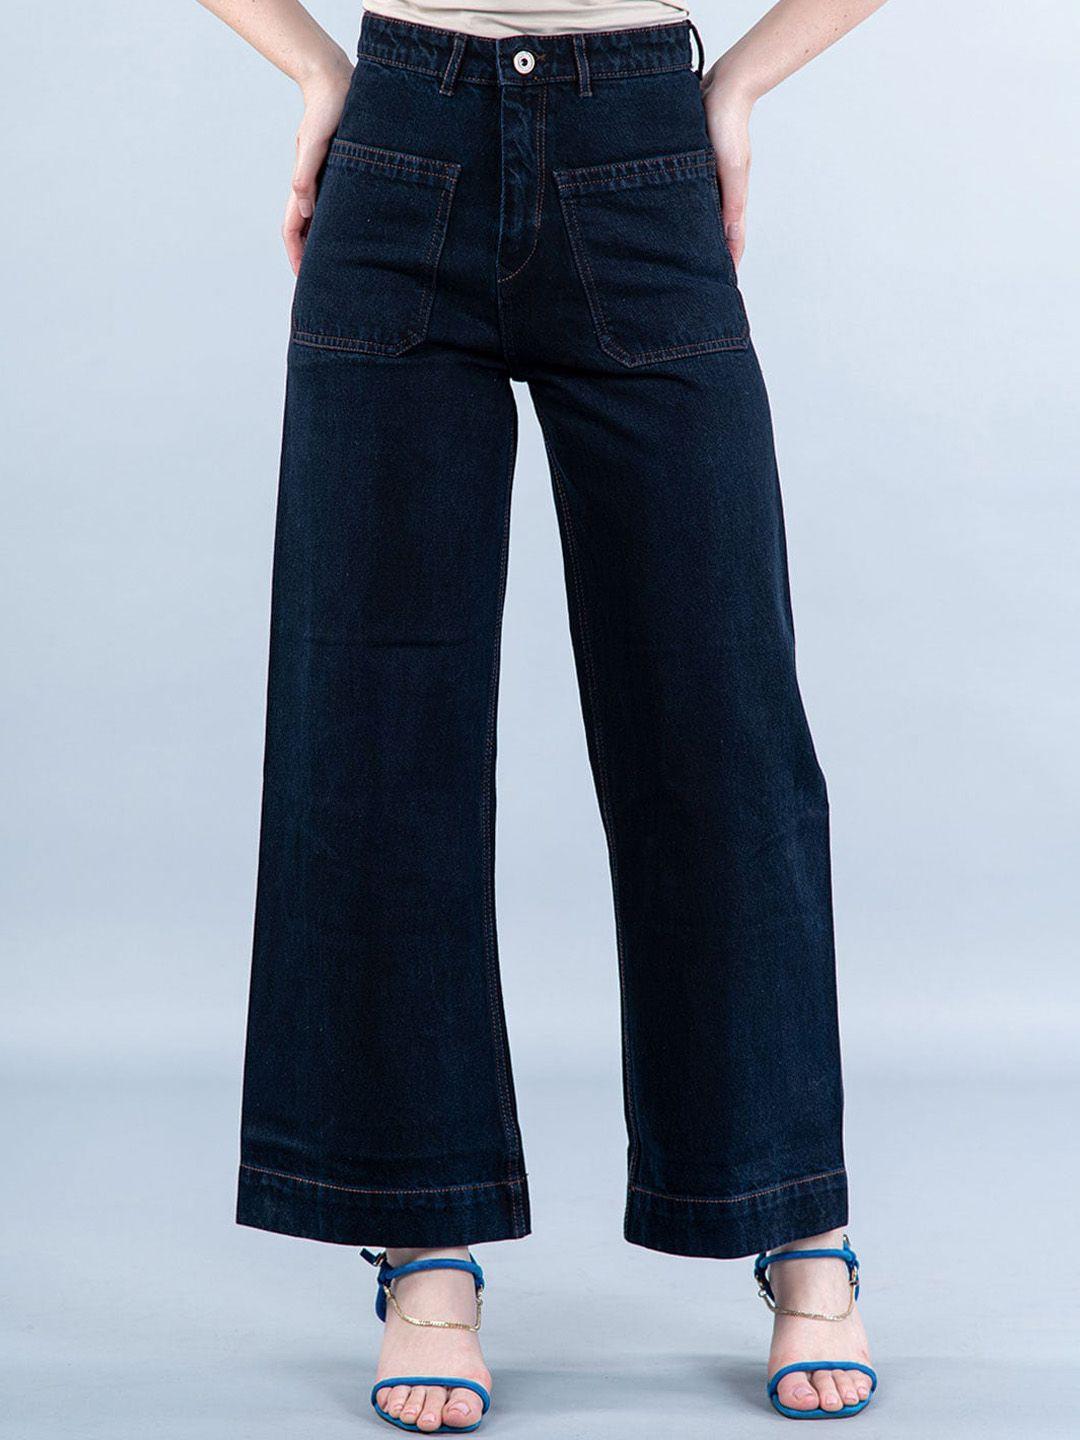 tistabene-women-comfort-stretchable-clean-look-jeans